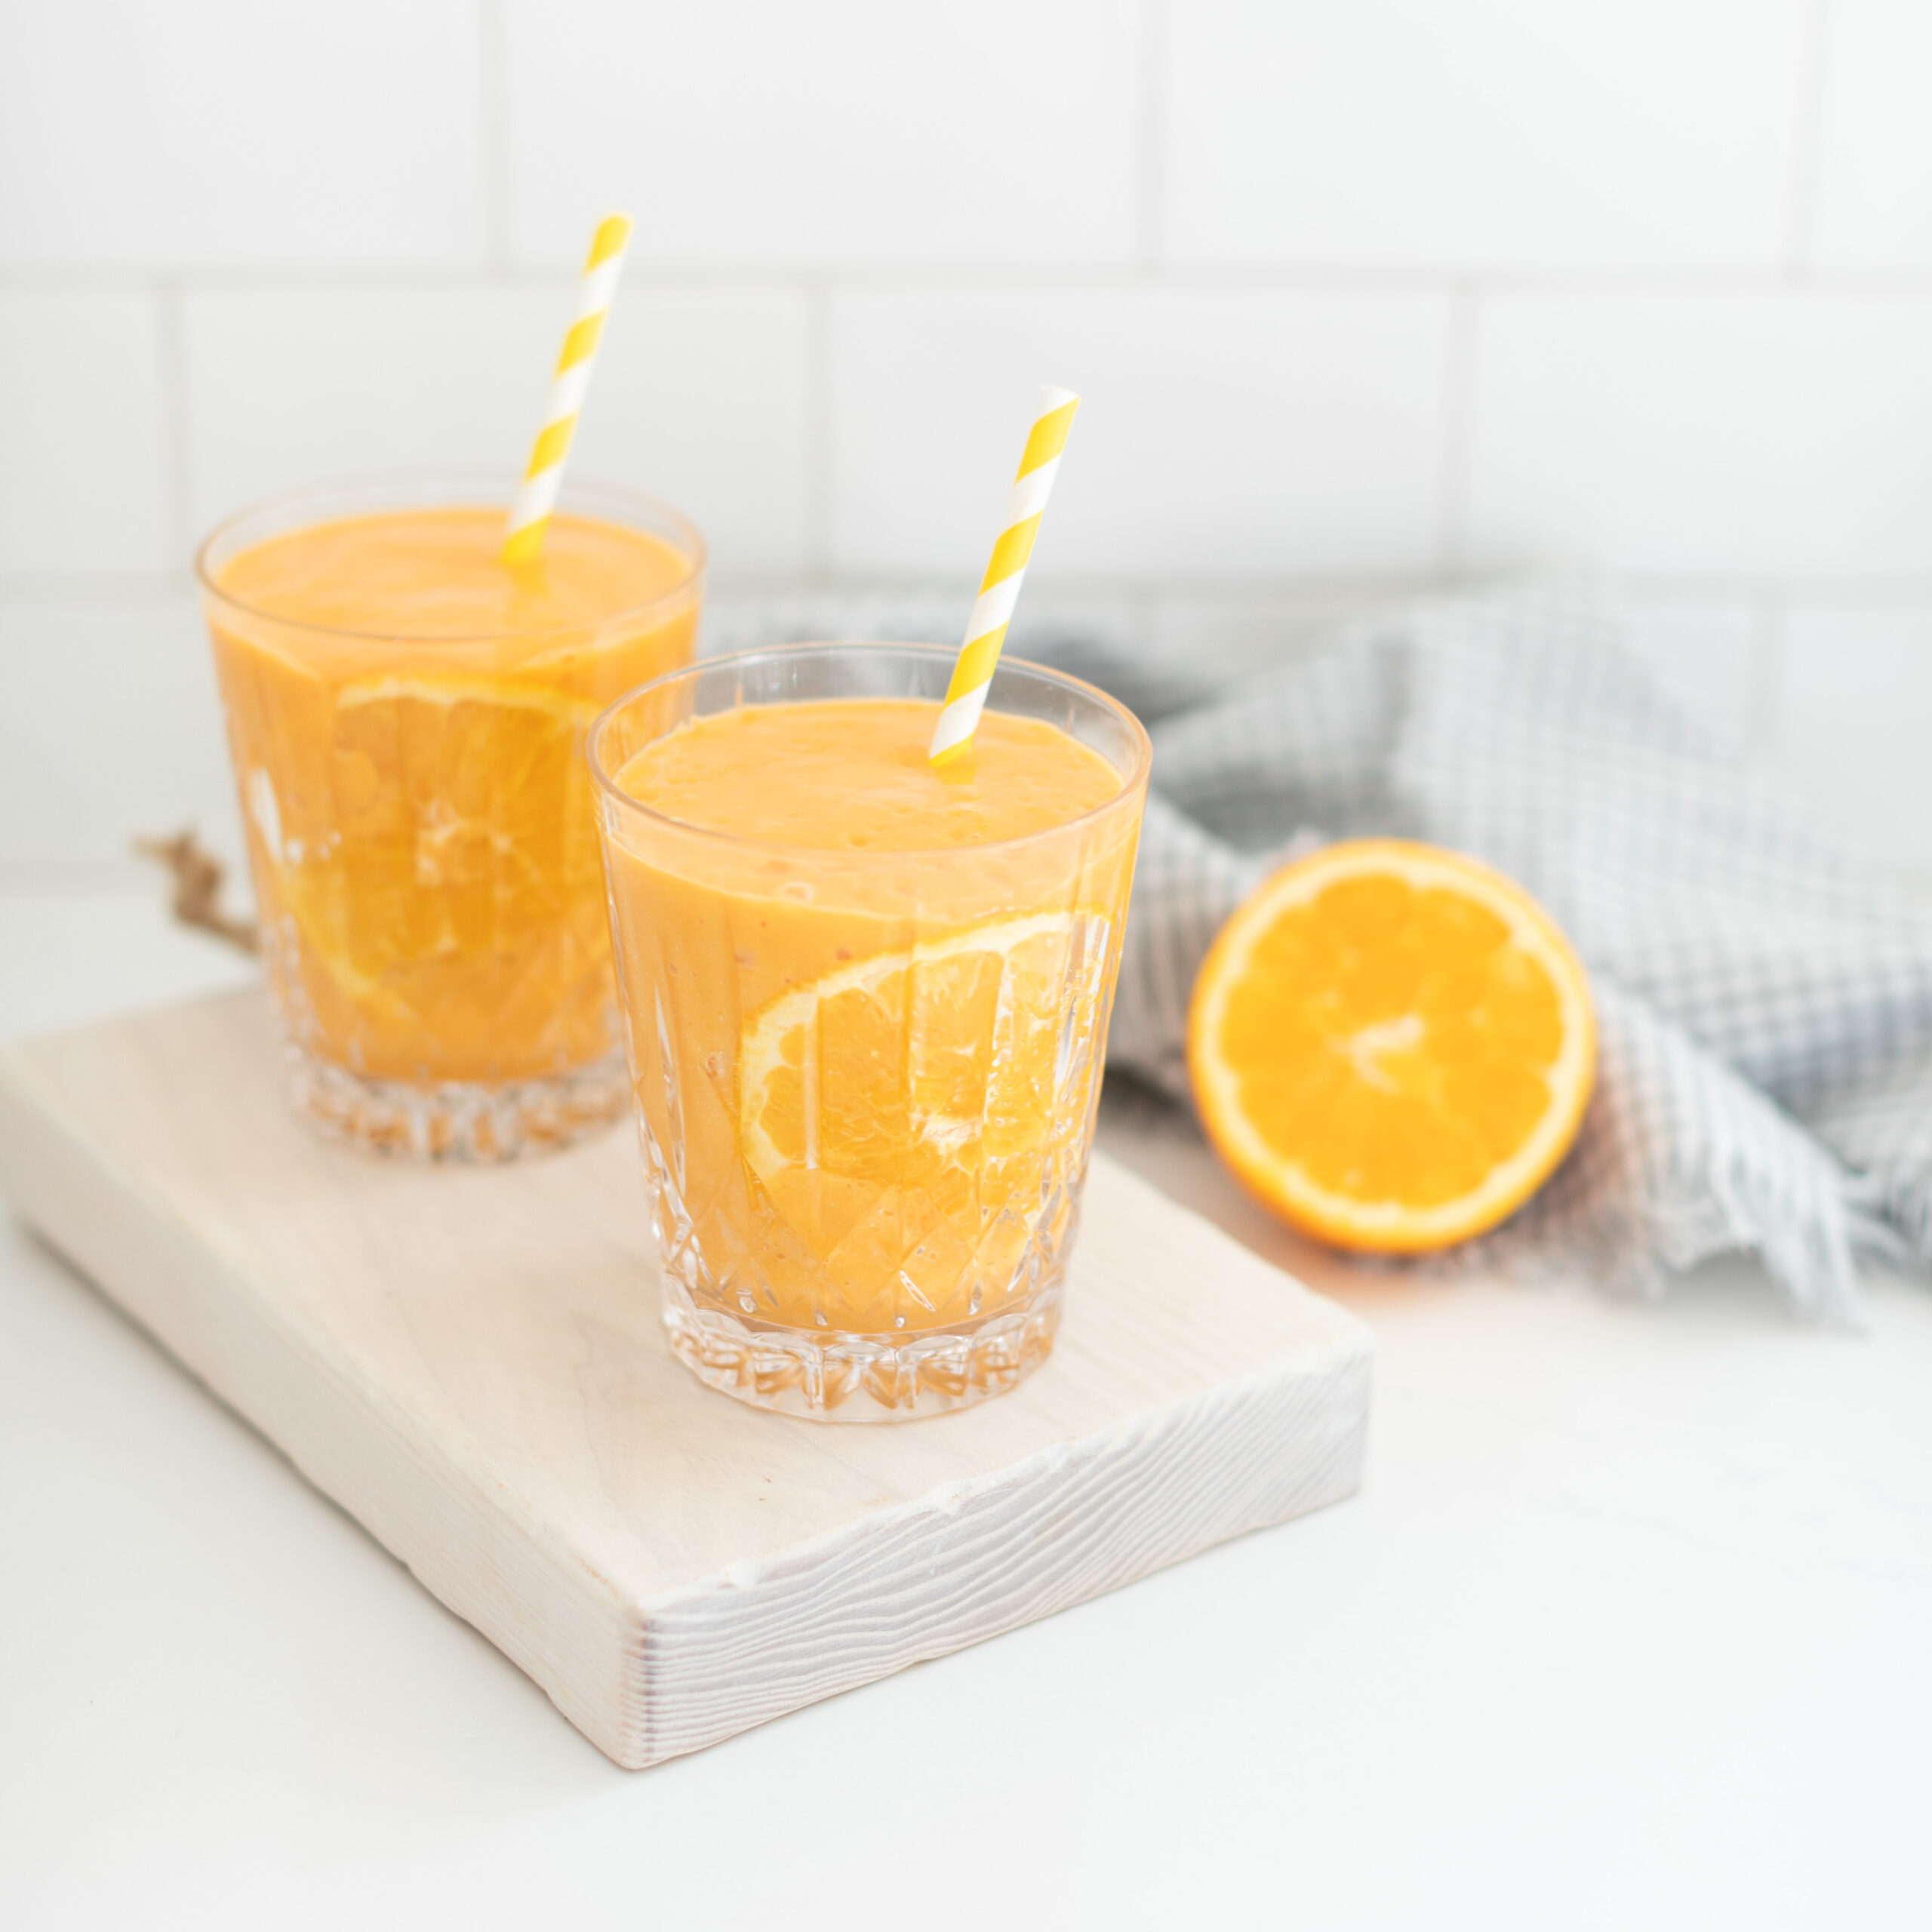 golden glow smoothie with ginger, turmeric, and orange